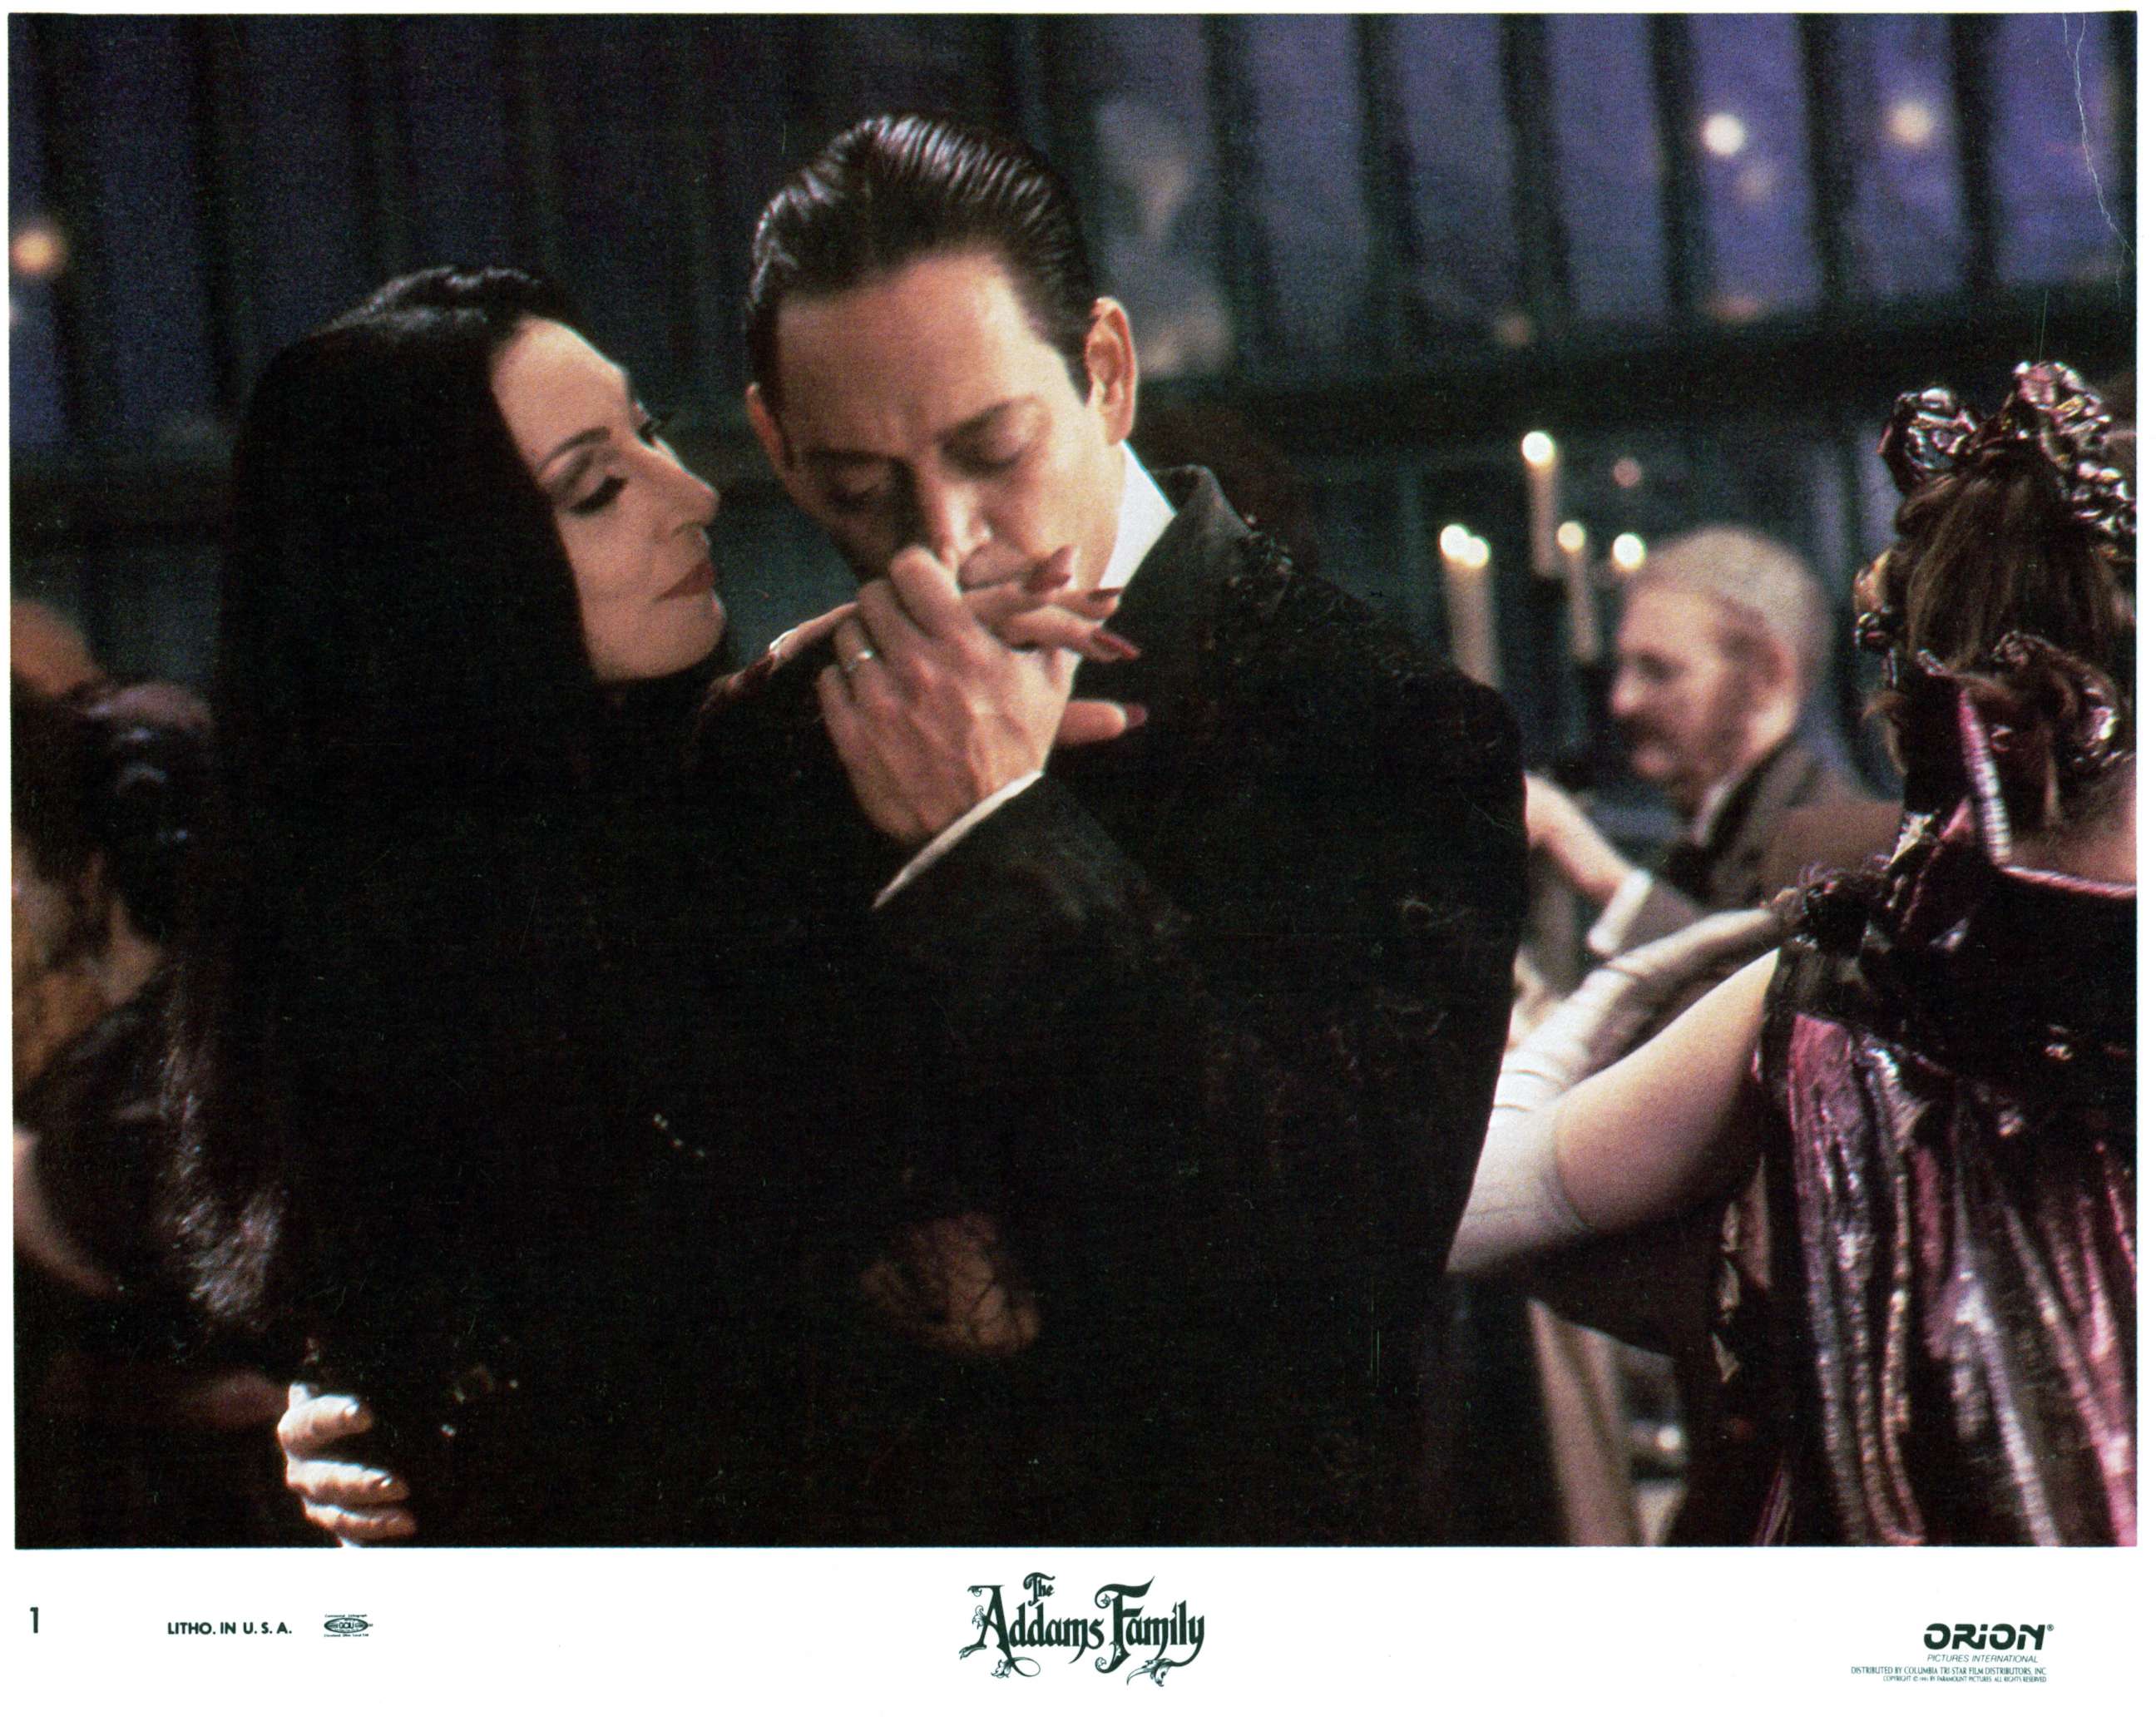 PHOTO: Anjelica Huston is kissed by Raul Julia in a scene from the film "The Addams Family."